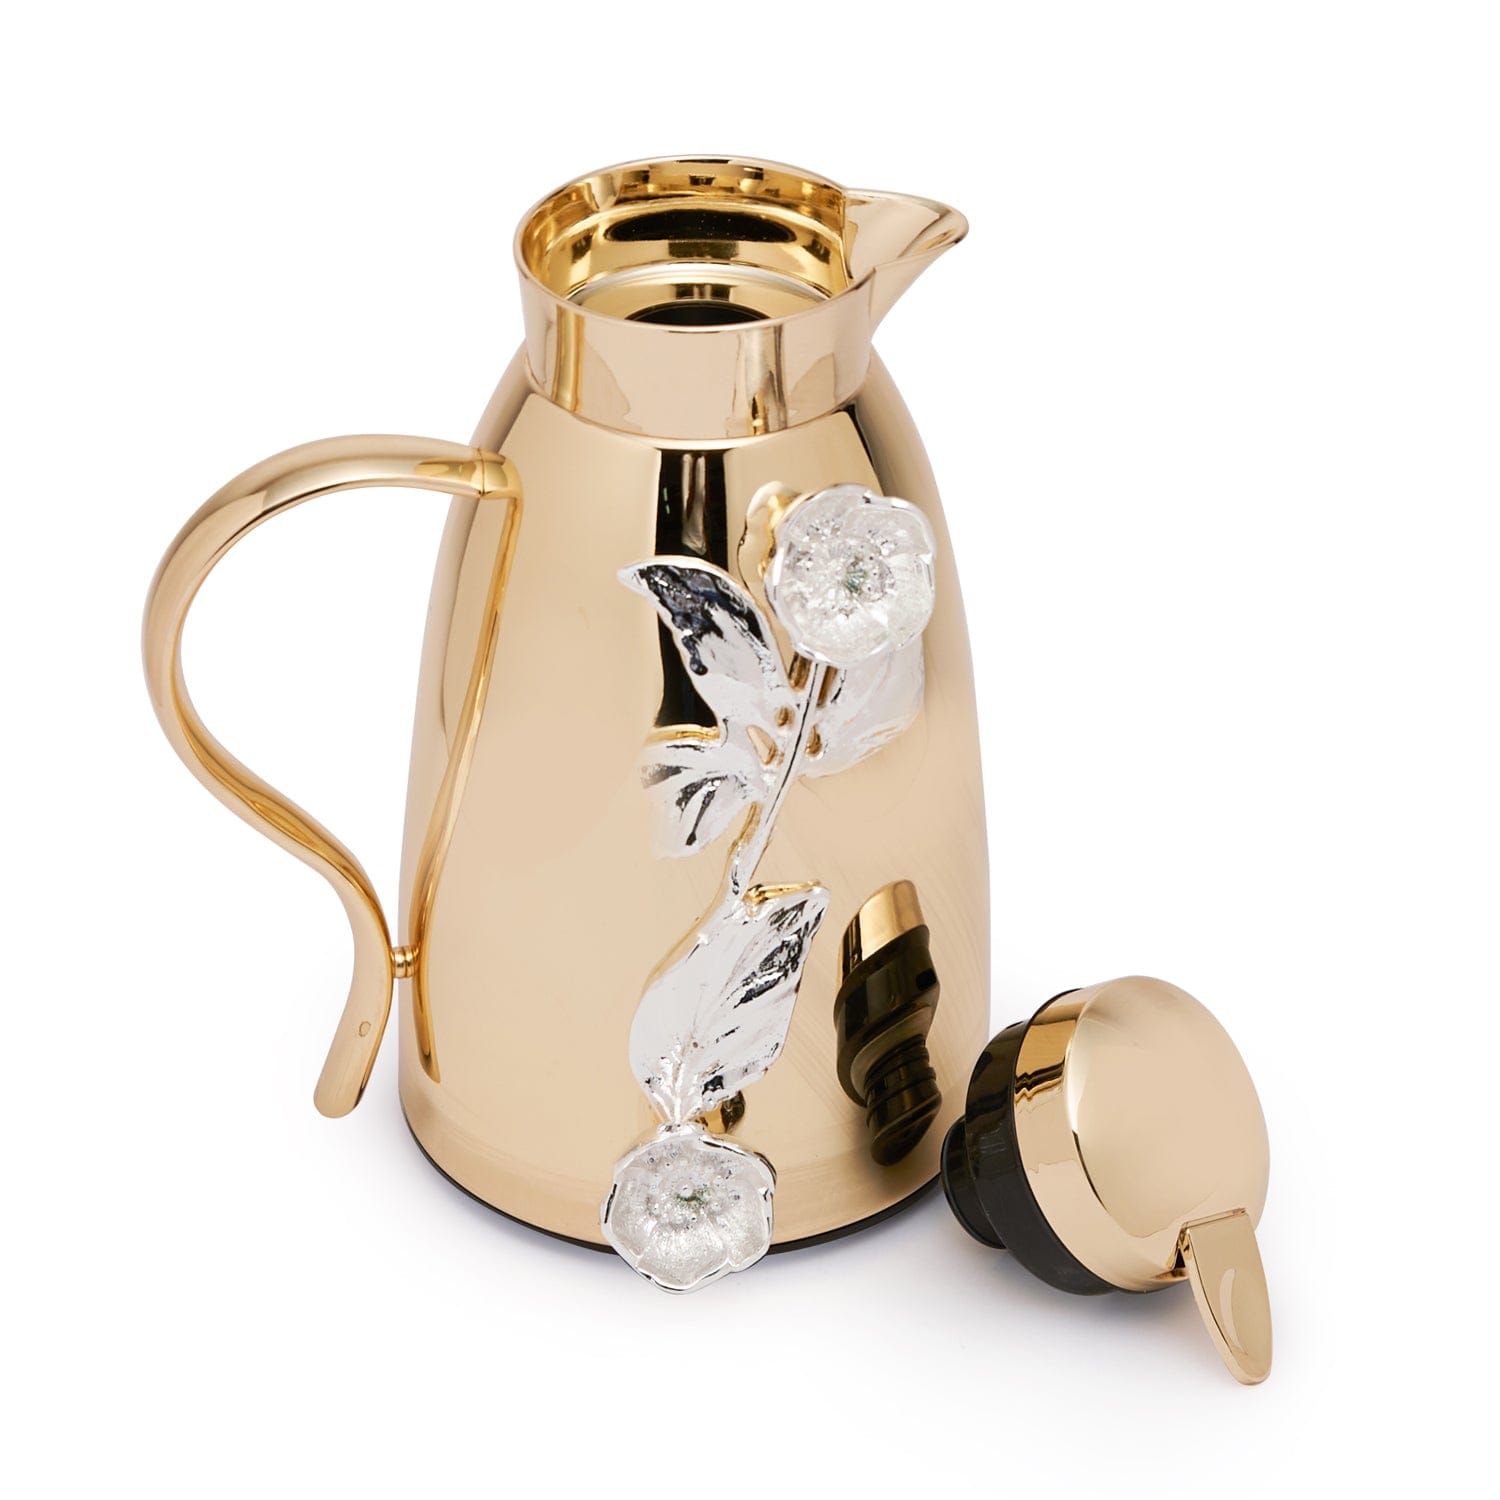 Pantazelos 4 Seasons Of Blossoms Goldplated and Silverplated Thermos - 1326-SINGLE/GPSP